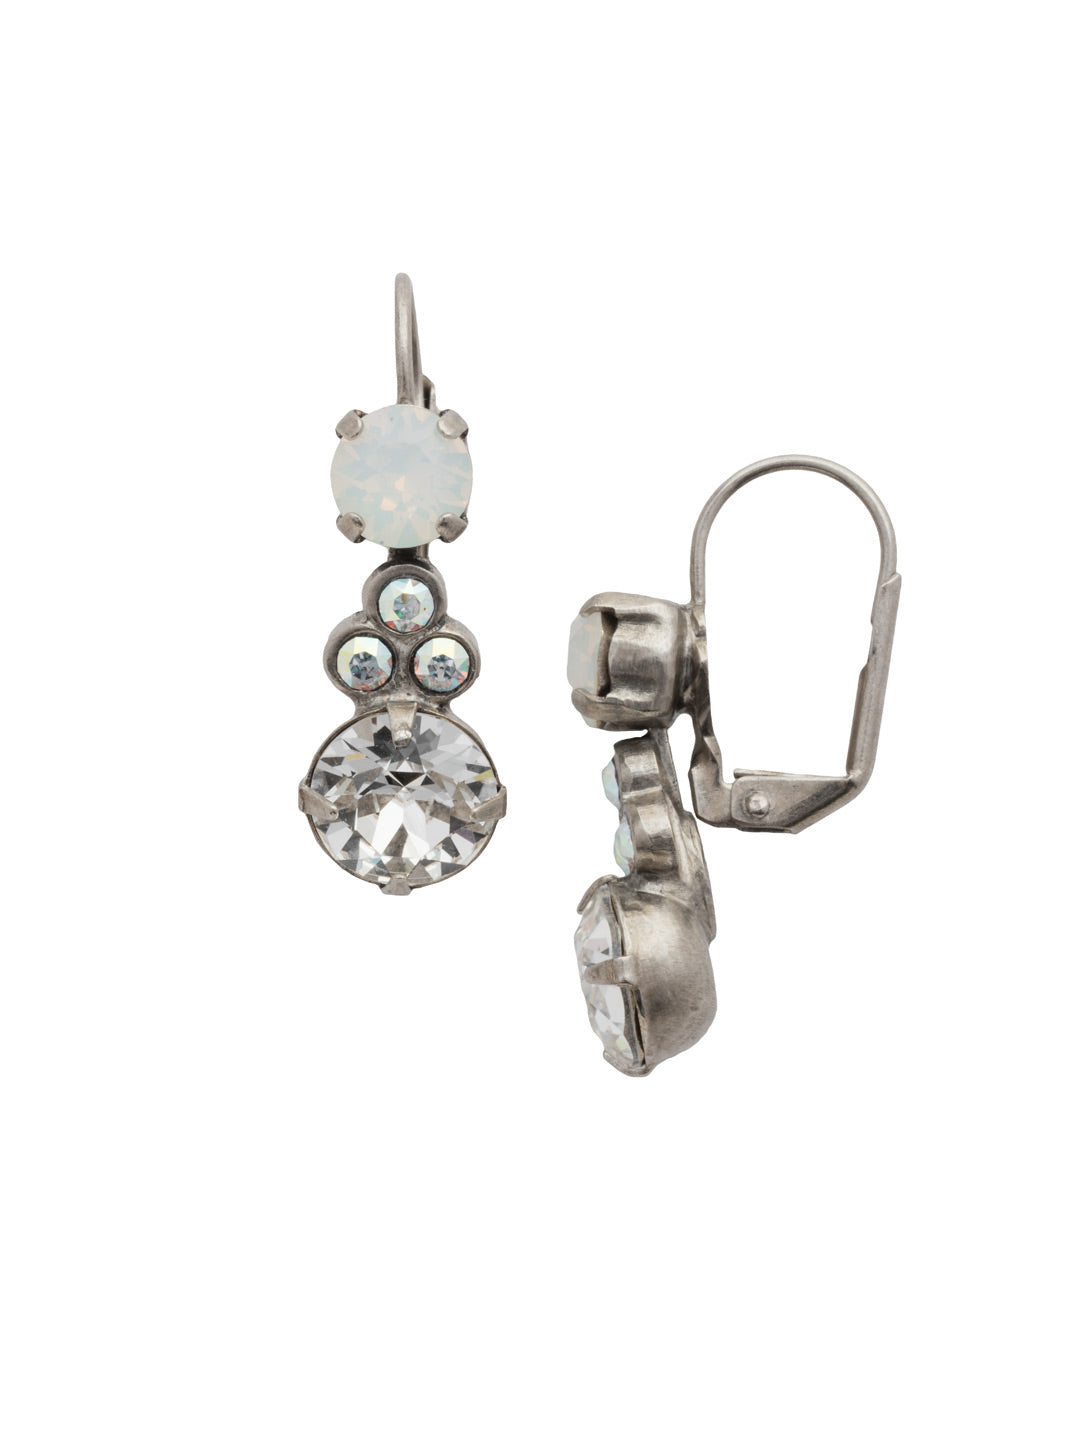 Clustered Circular Crystal Drop Dangle Earrings - ECJ14ASWBR - A cluster of round crystals sit between two larger gemstones in these delicate french wire earrings. From Sorrelli's White Bridal collection in our Antique Silver-tone finish.